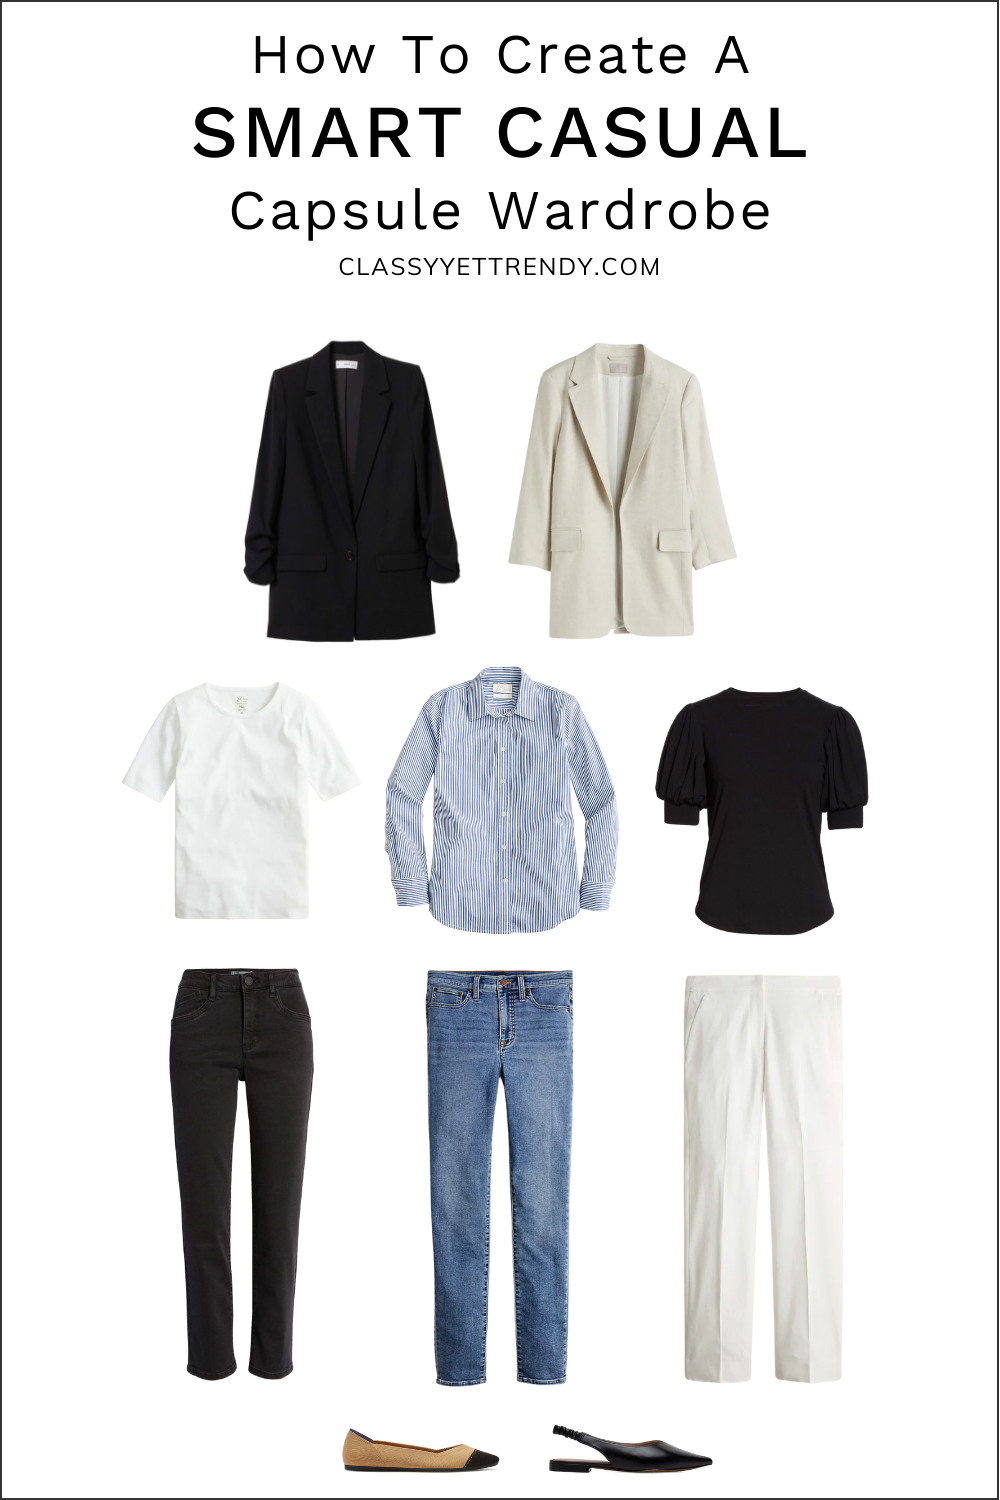 How To Create A Smart-Casual Capsule Wardrobe: 10 Pieces / 9 Outfits -  Classy Yet Trendy